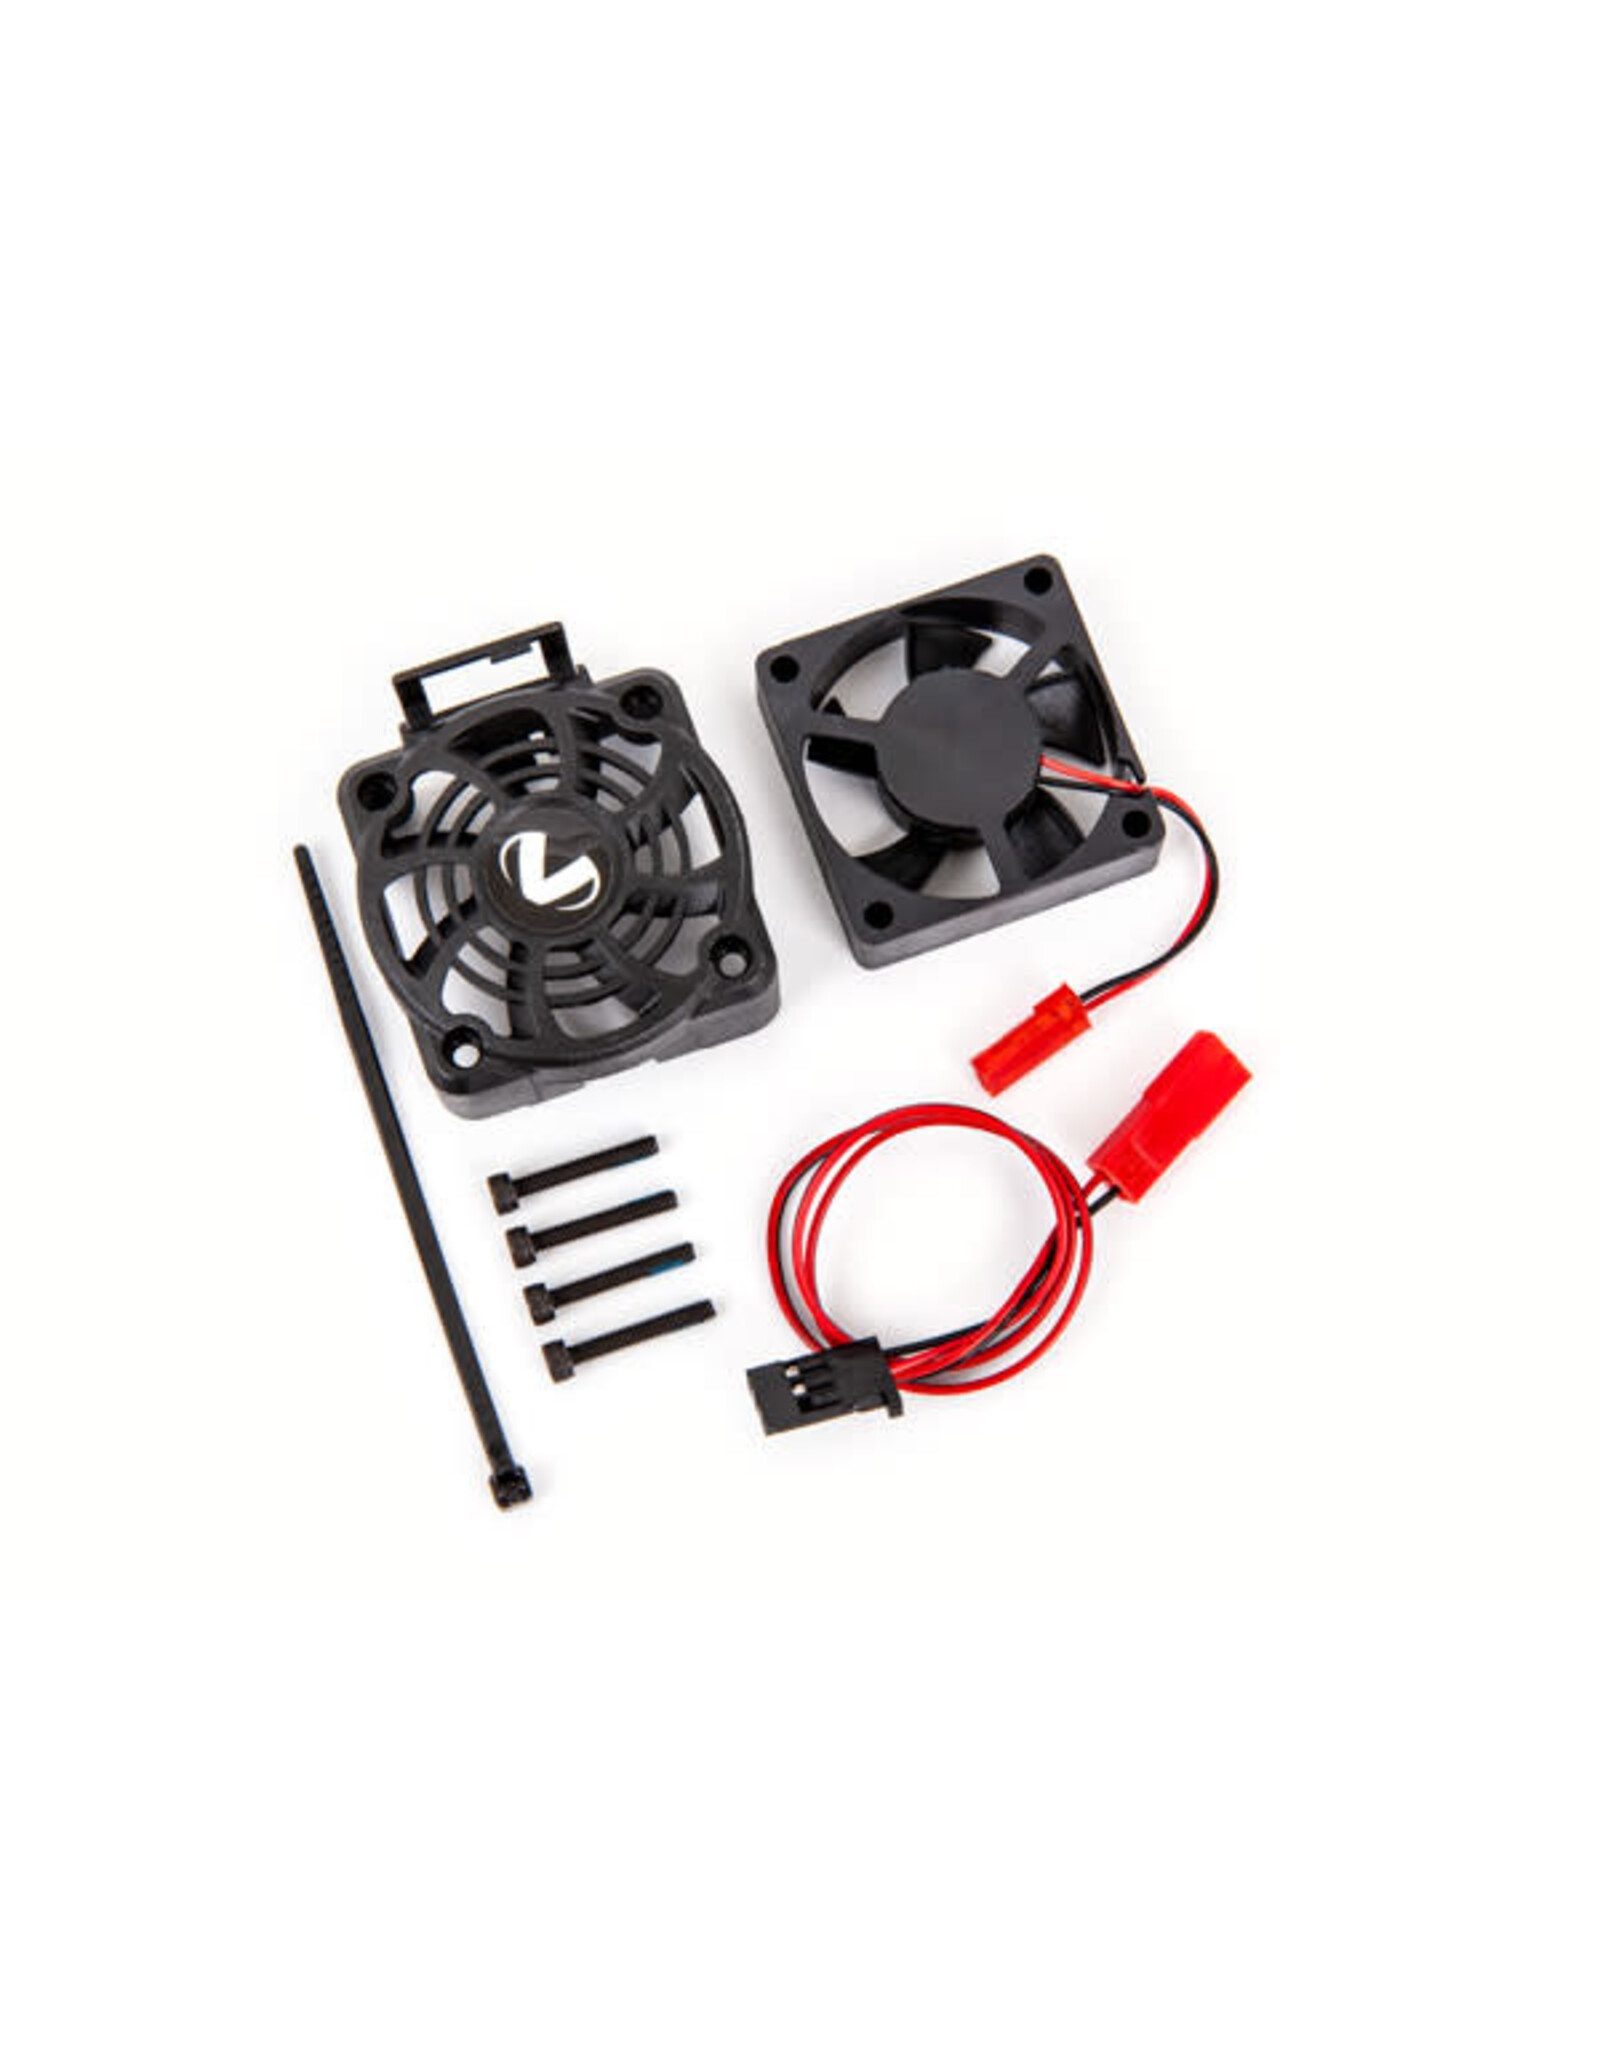 Traxxas Cooling fan kit (with shroud)/ 2.5x16mm CS (with threadlock) (4) (fits #3483 motor)